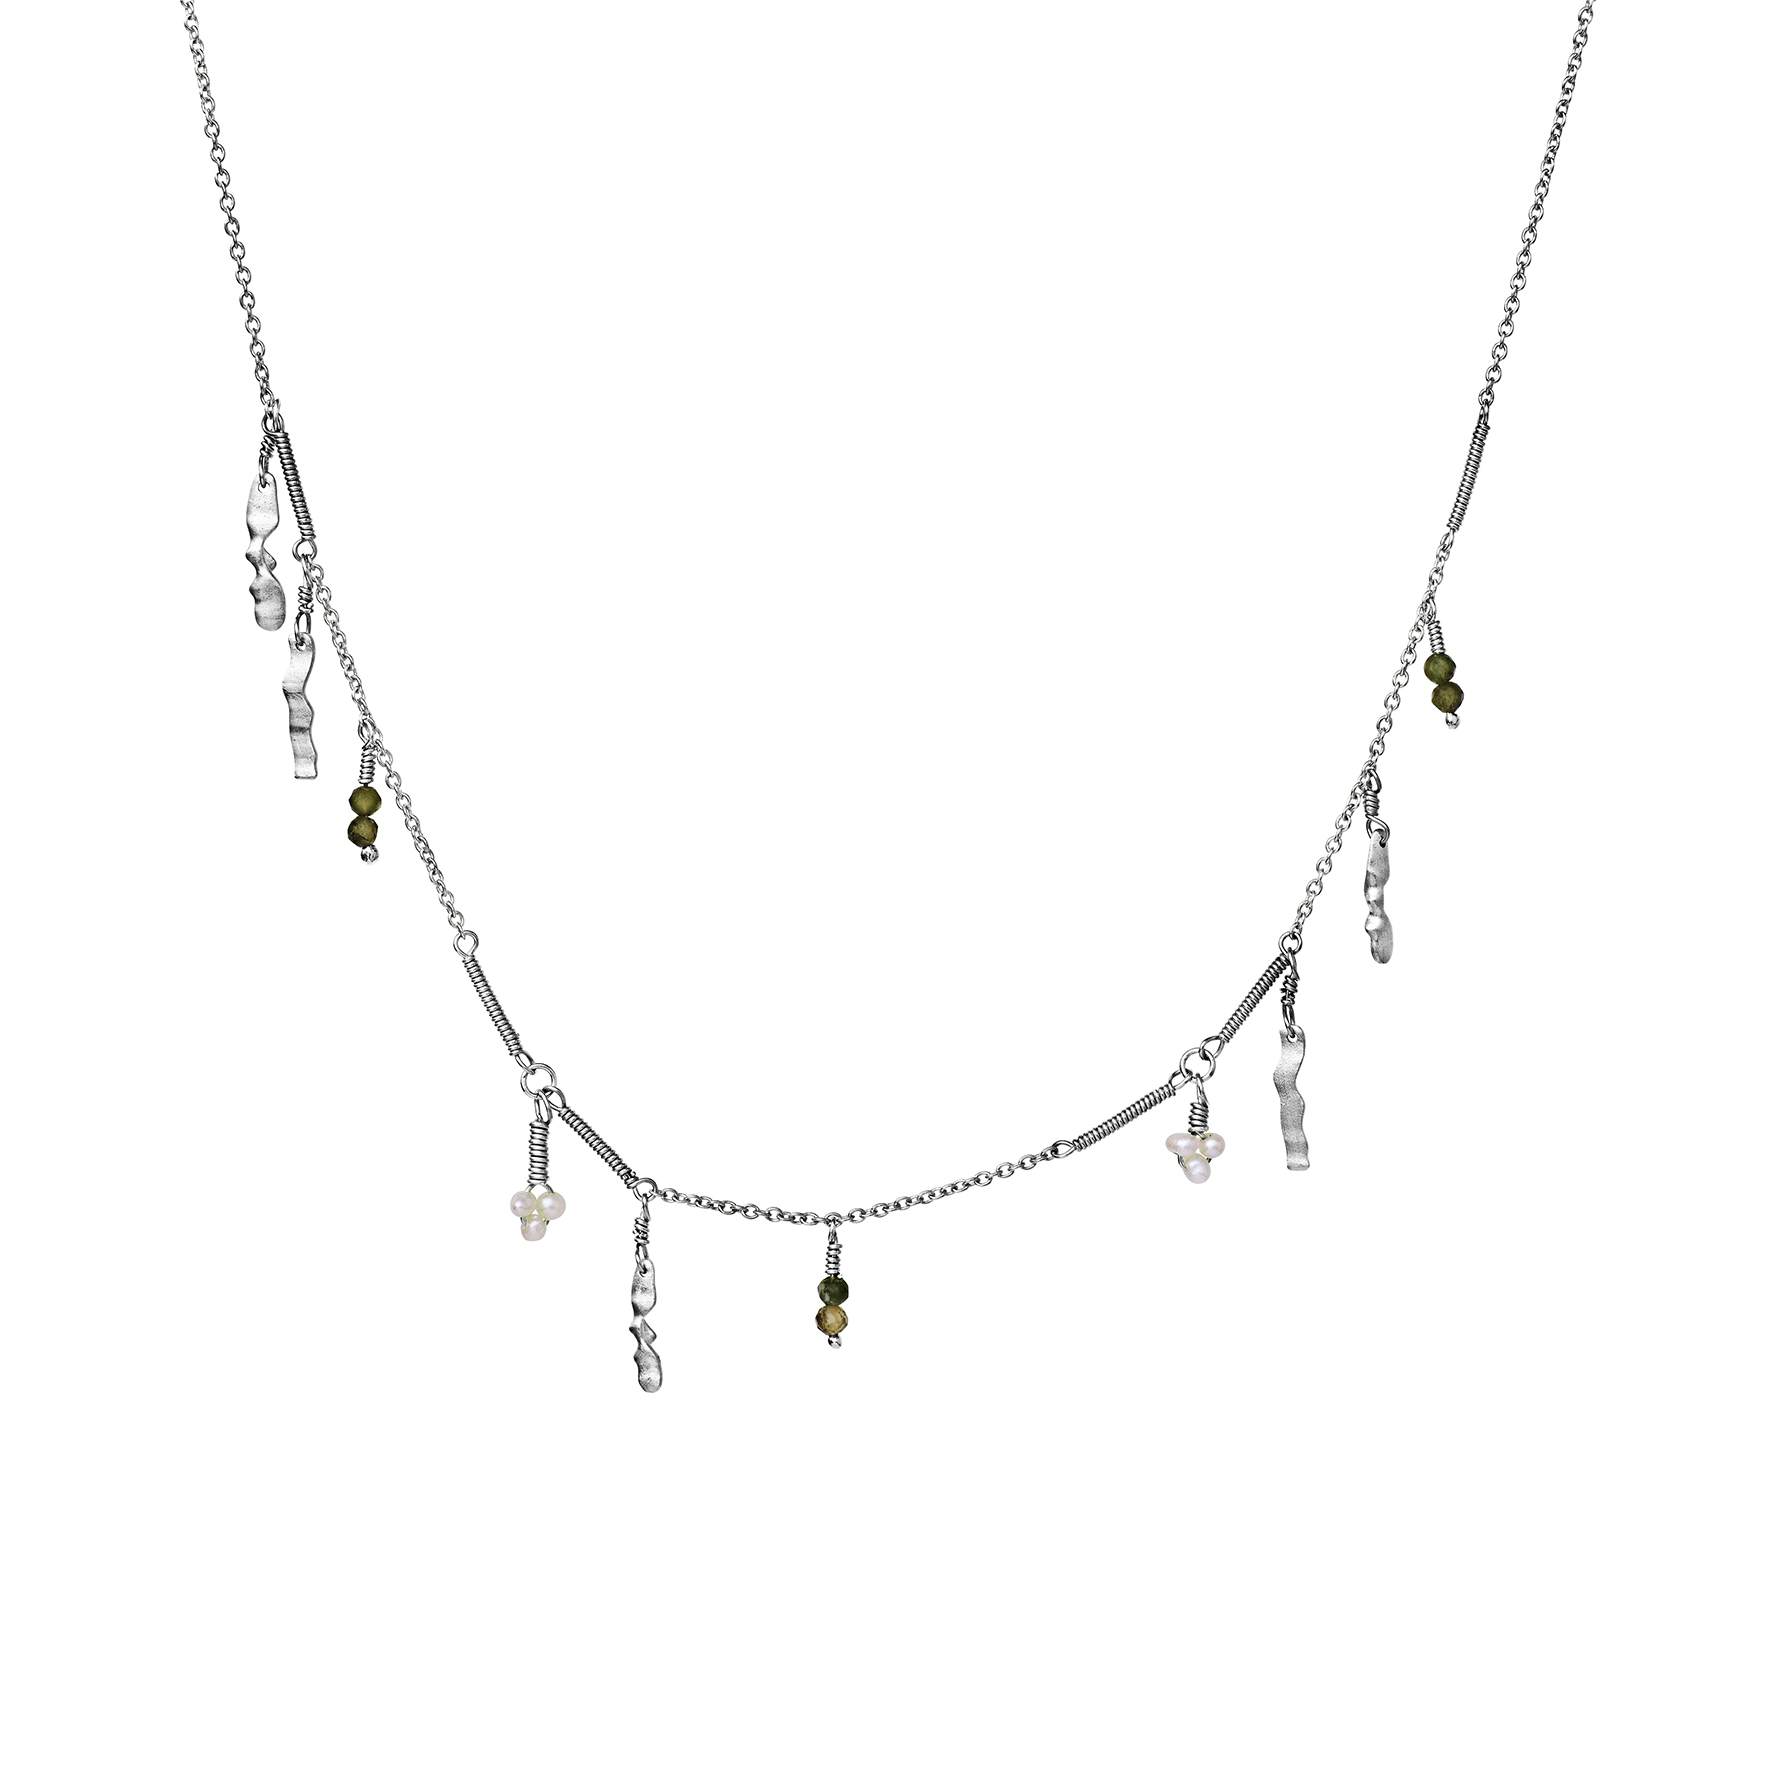 Bergdis Necklace from Maanesten in Silver Sterling 925